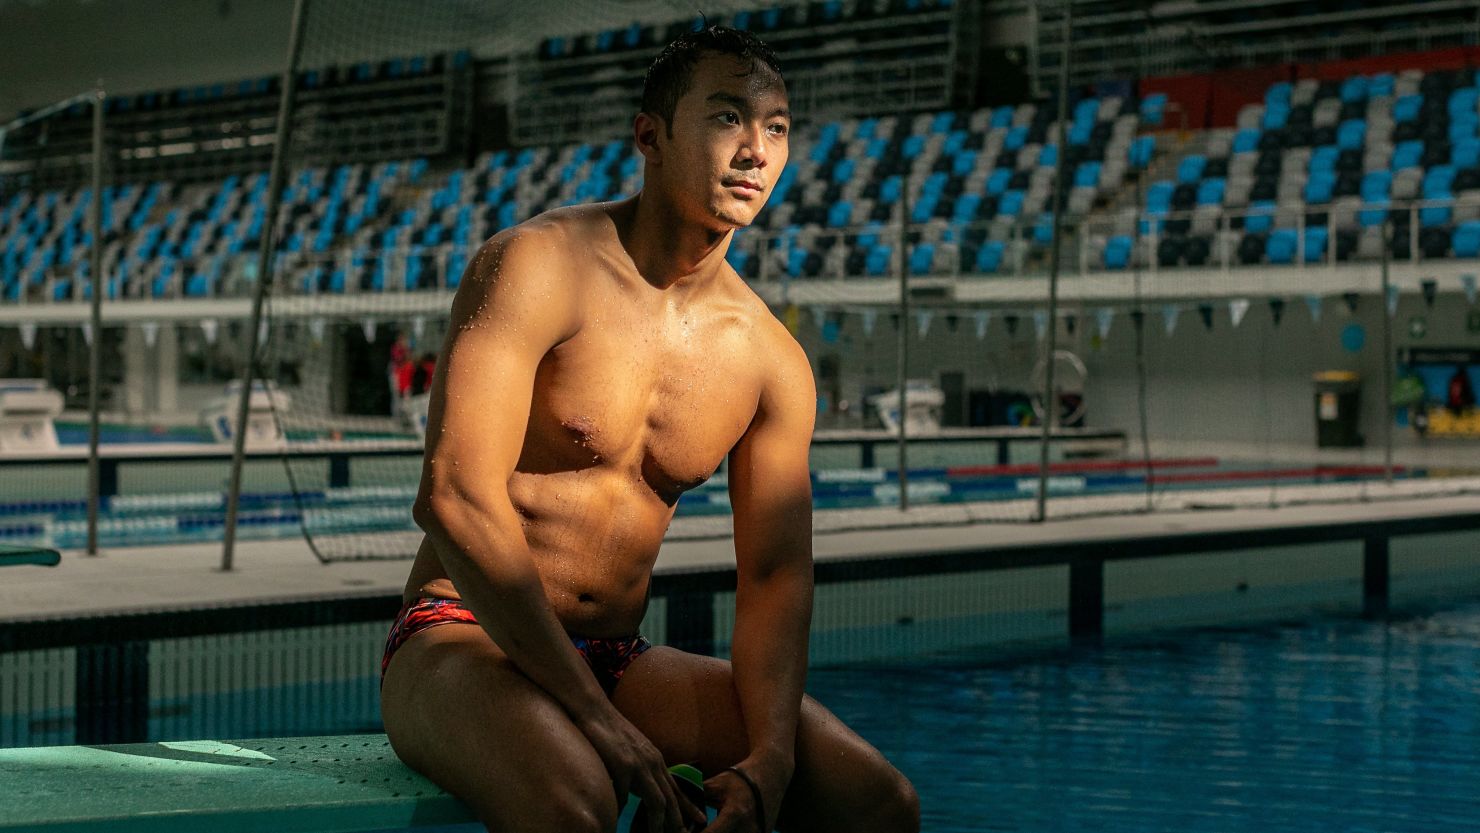 Myanmar swimmer Win Htet Oo attends a training session at the Melbourne Aquatic Centre in Australia.